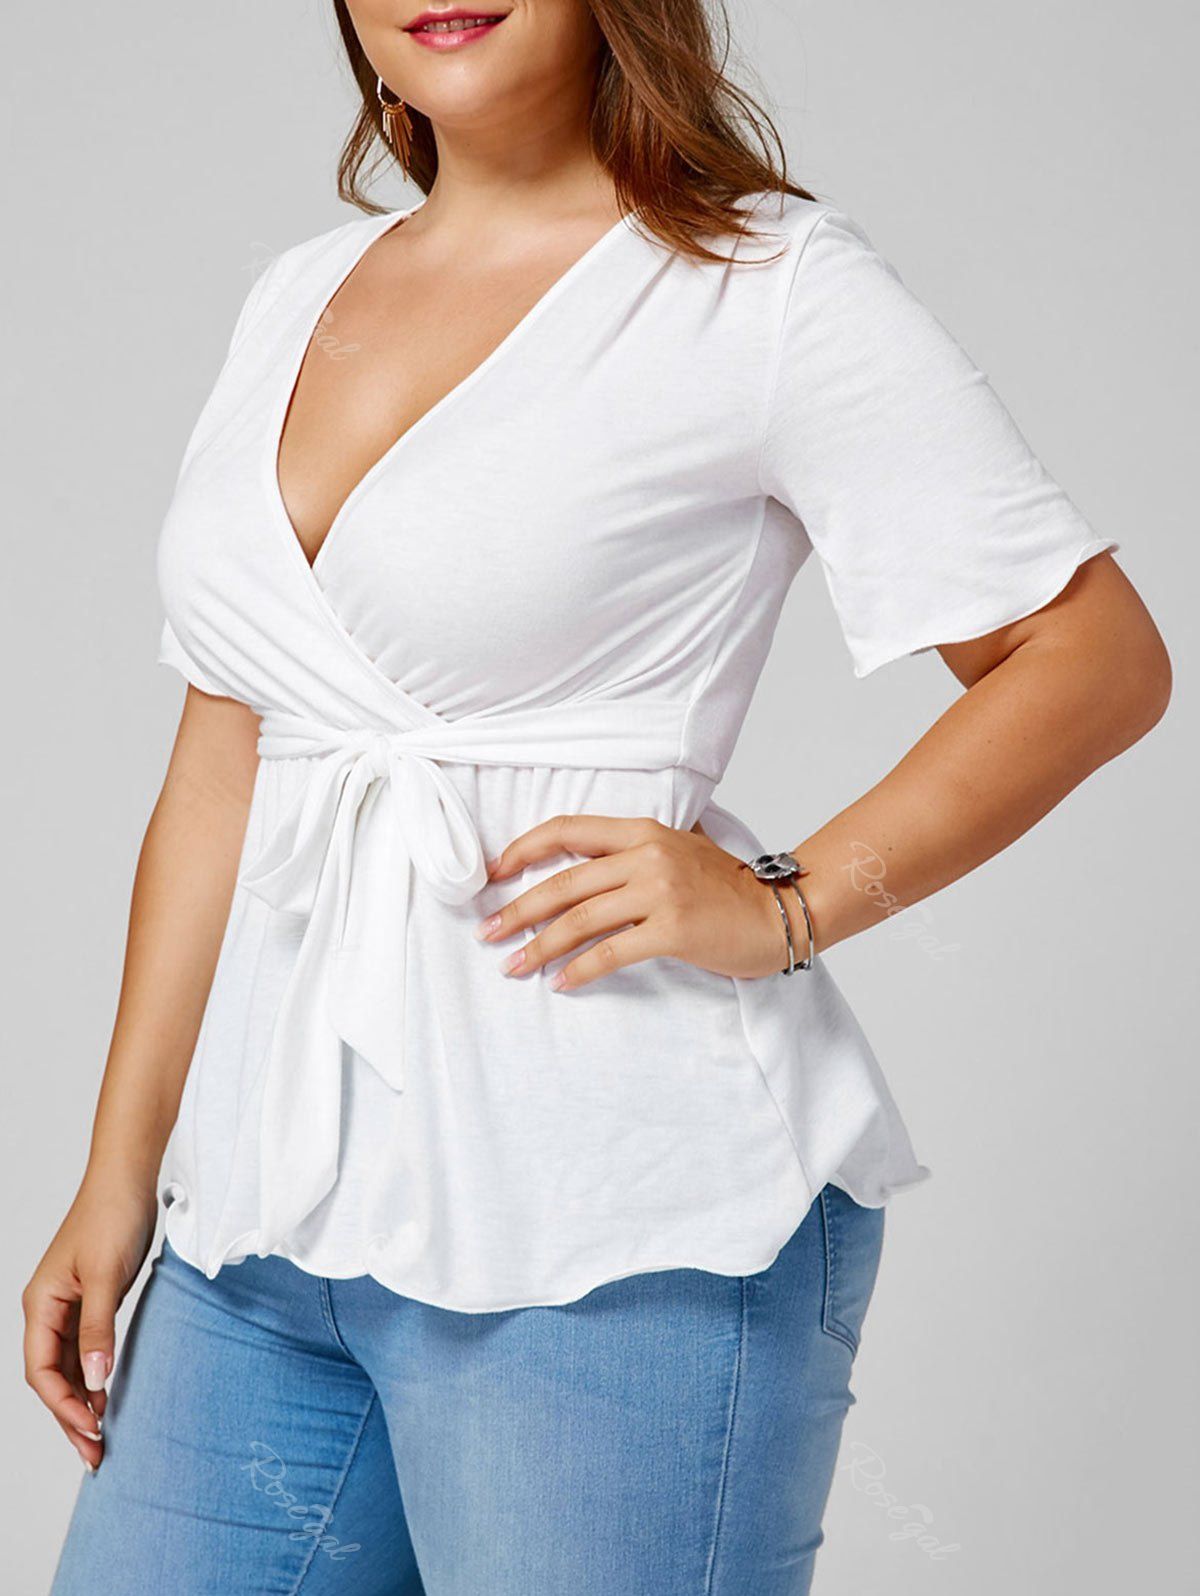 Tunic Top Women Plus Size Fashion Solid Belted Surplice Blouse Short Sleeve V-Neck T Shirt White, XL